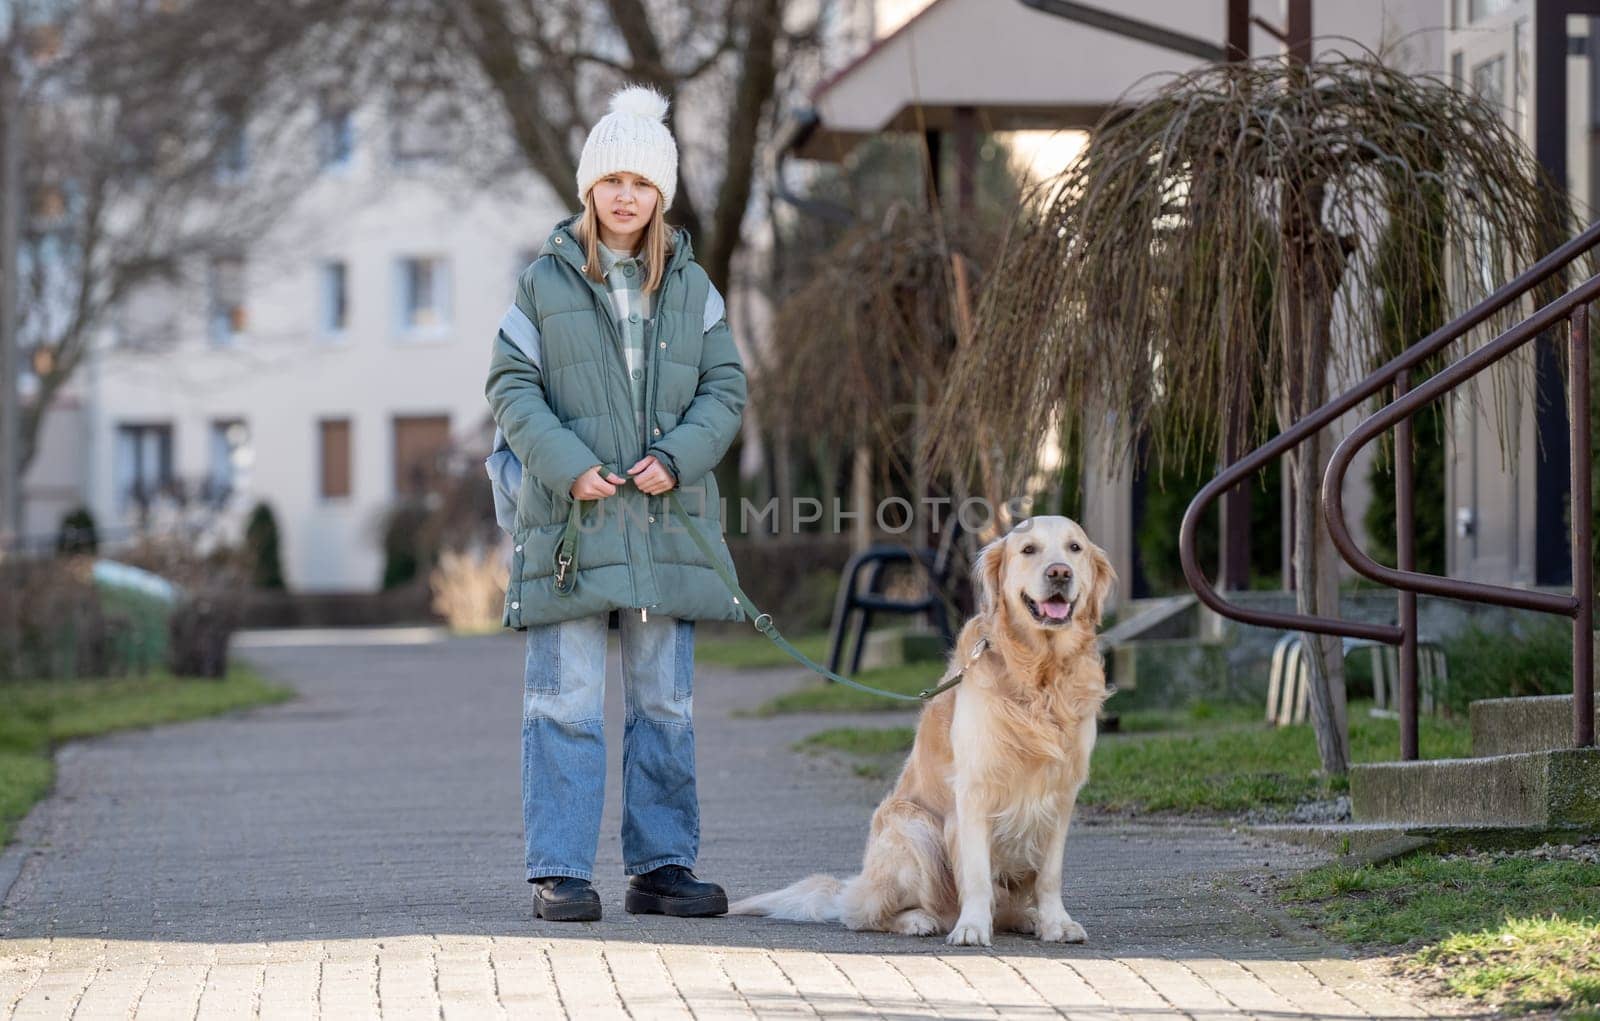 Small Girl In Green Jacket Walks With Golden Retriever On Street In Early Spring, Showcasing A Child And Dog Bond